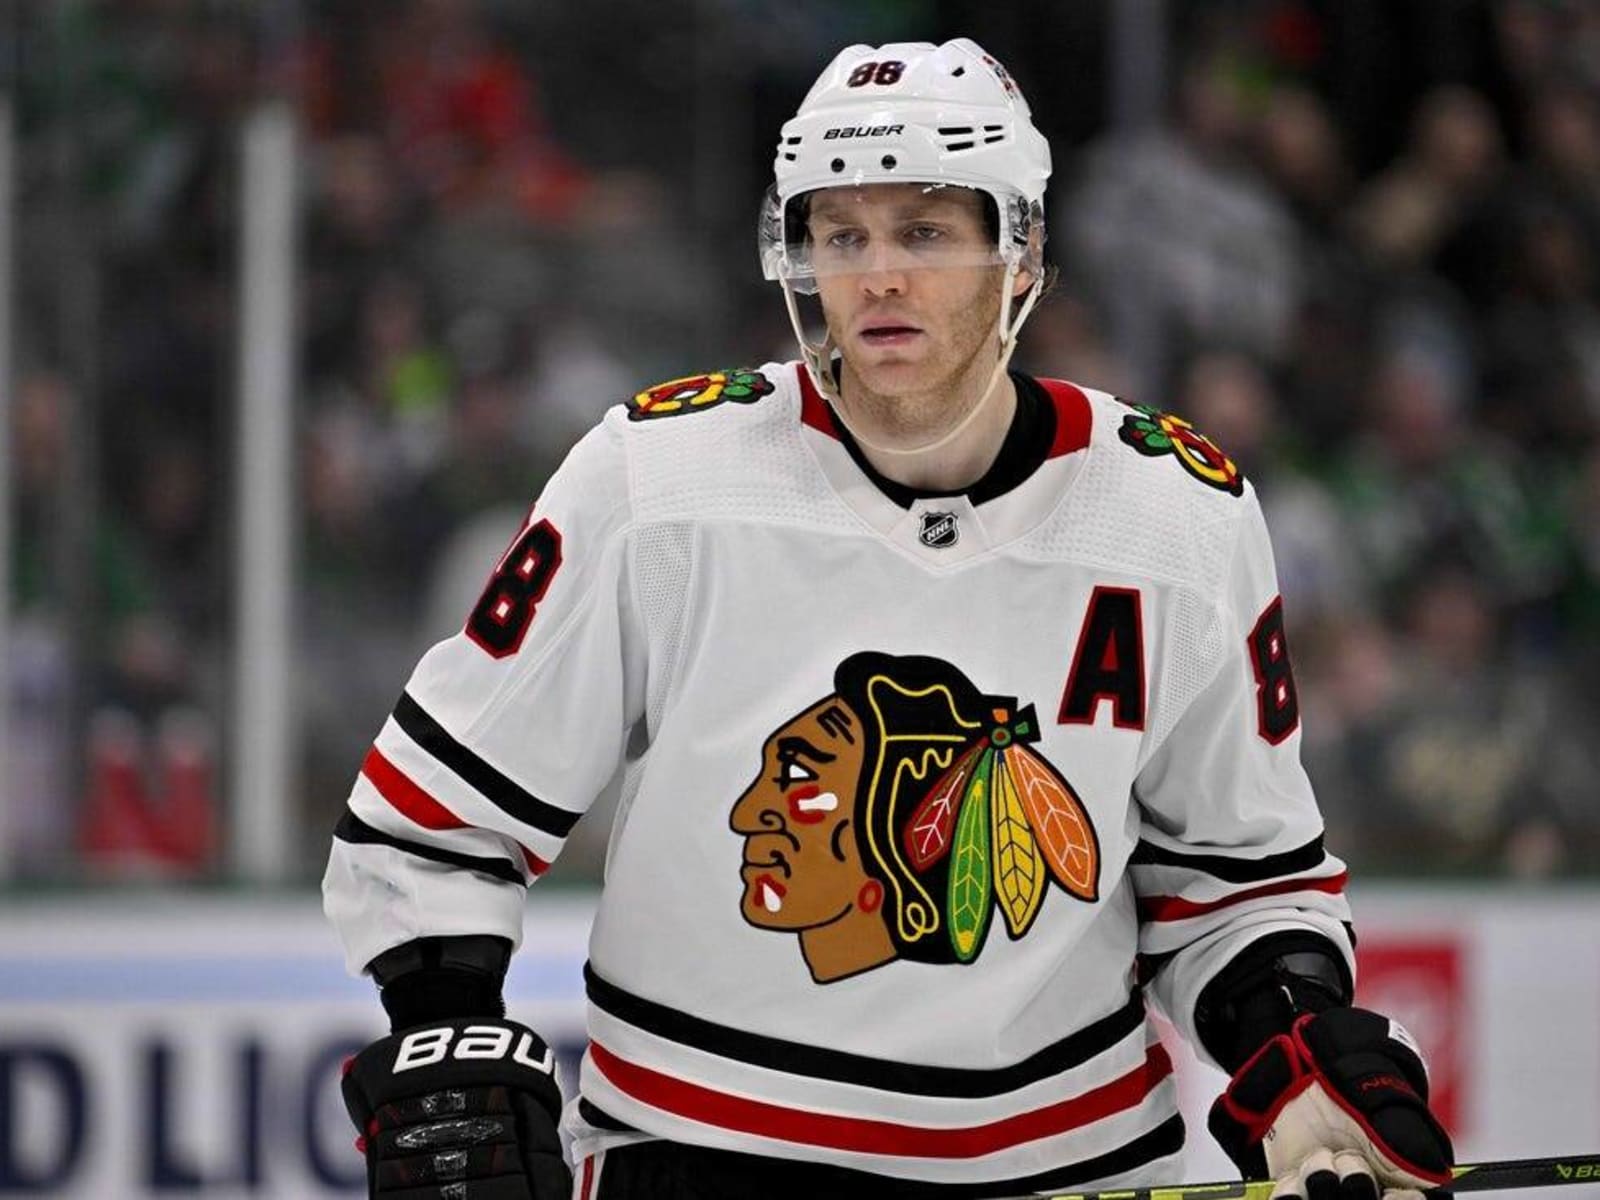 Rangers fall to Patrick Kane, Blackhawks in second straight home loss